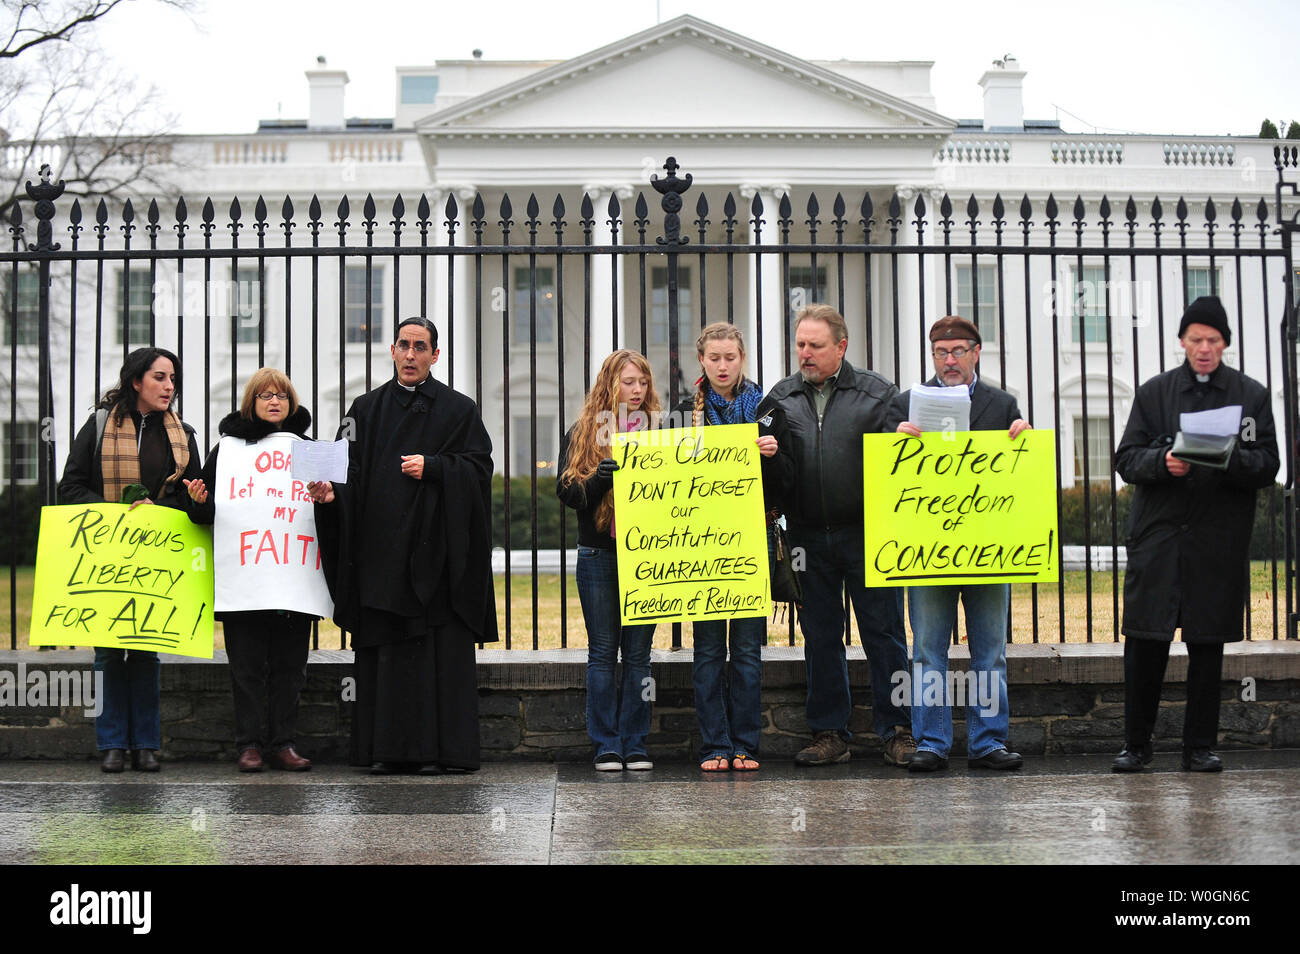 A pro-life activists protest in front of the White House in Washington, D.C. on February 16, 2012. The group was protesting President Obama's new health care mandate requiring religious organizations to cover birth control.  UPI/Kevin Dietsch Stock Photo